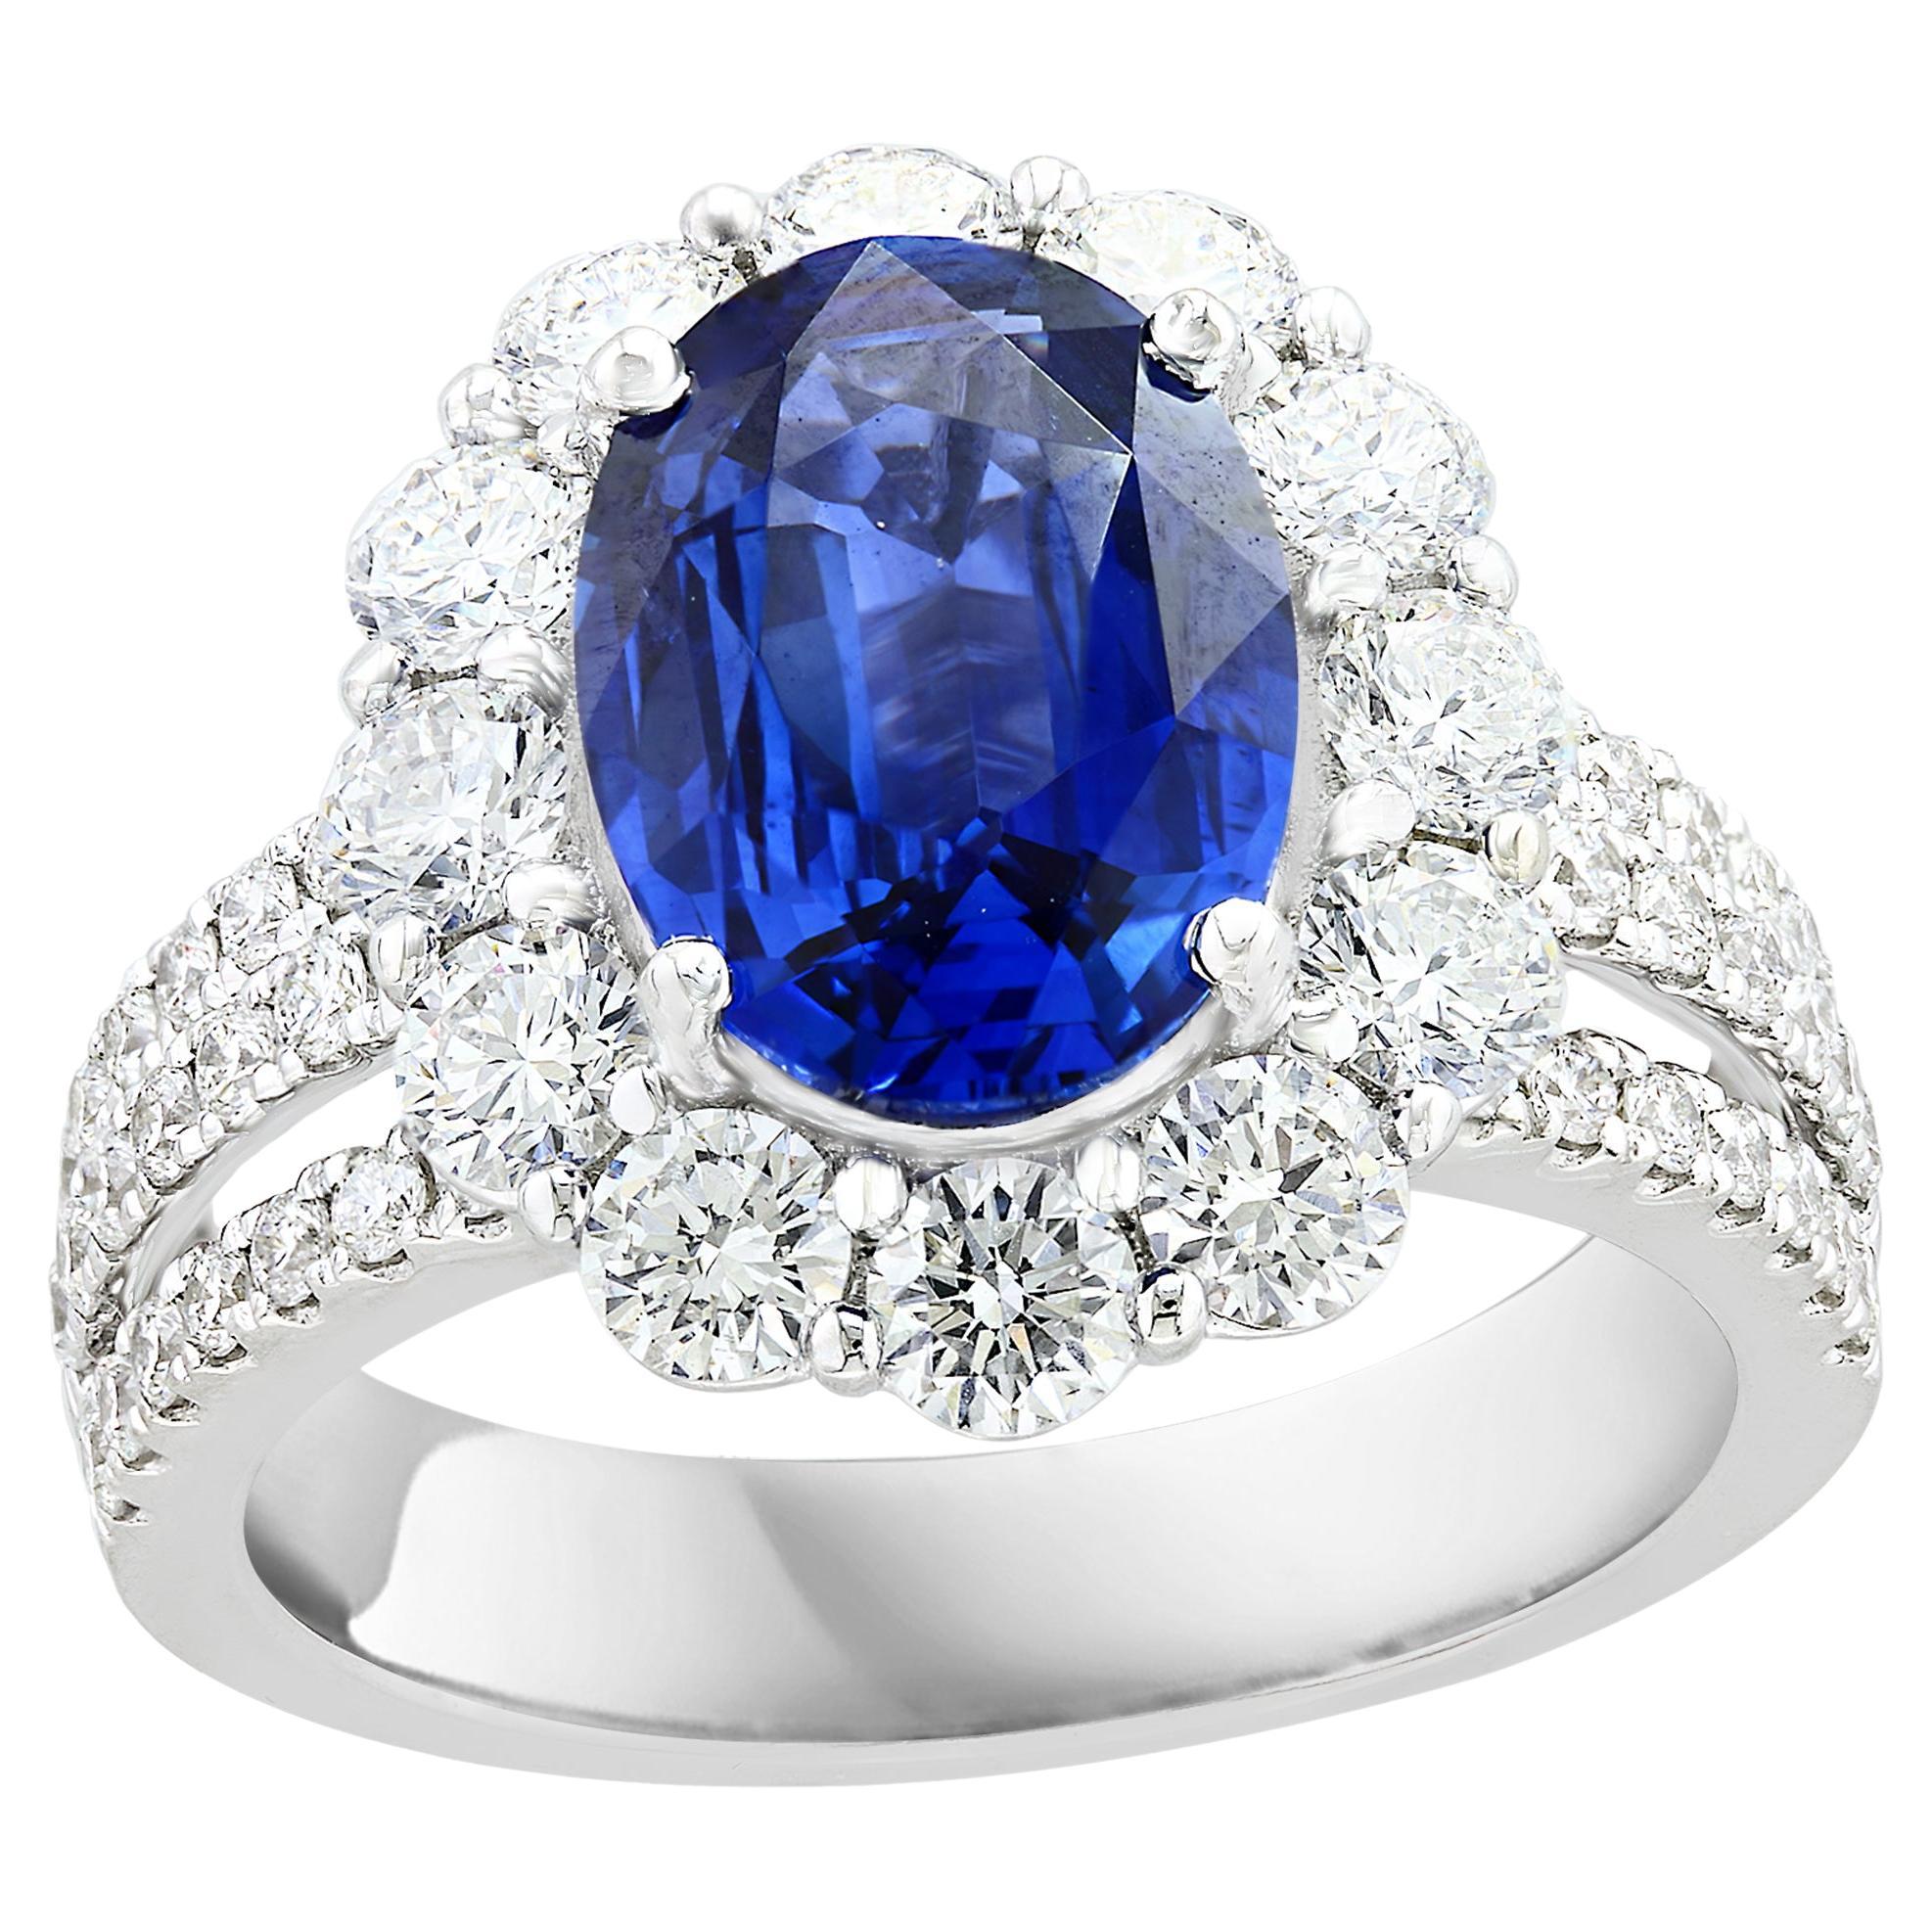 3.09 Carat Oval Shape Blue Sapphire and Diamond Flower Ring in 18K White Gold For Sale